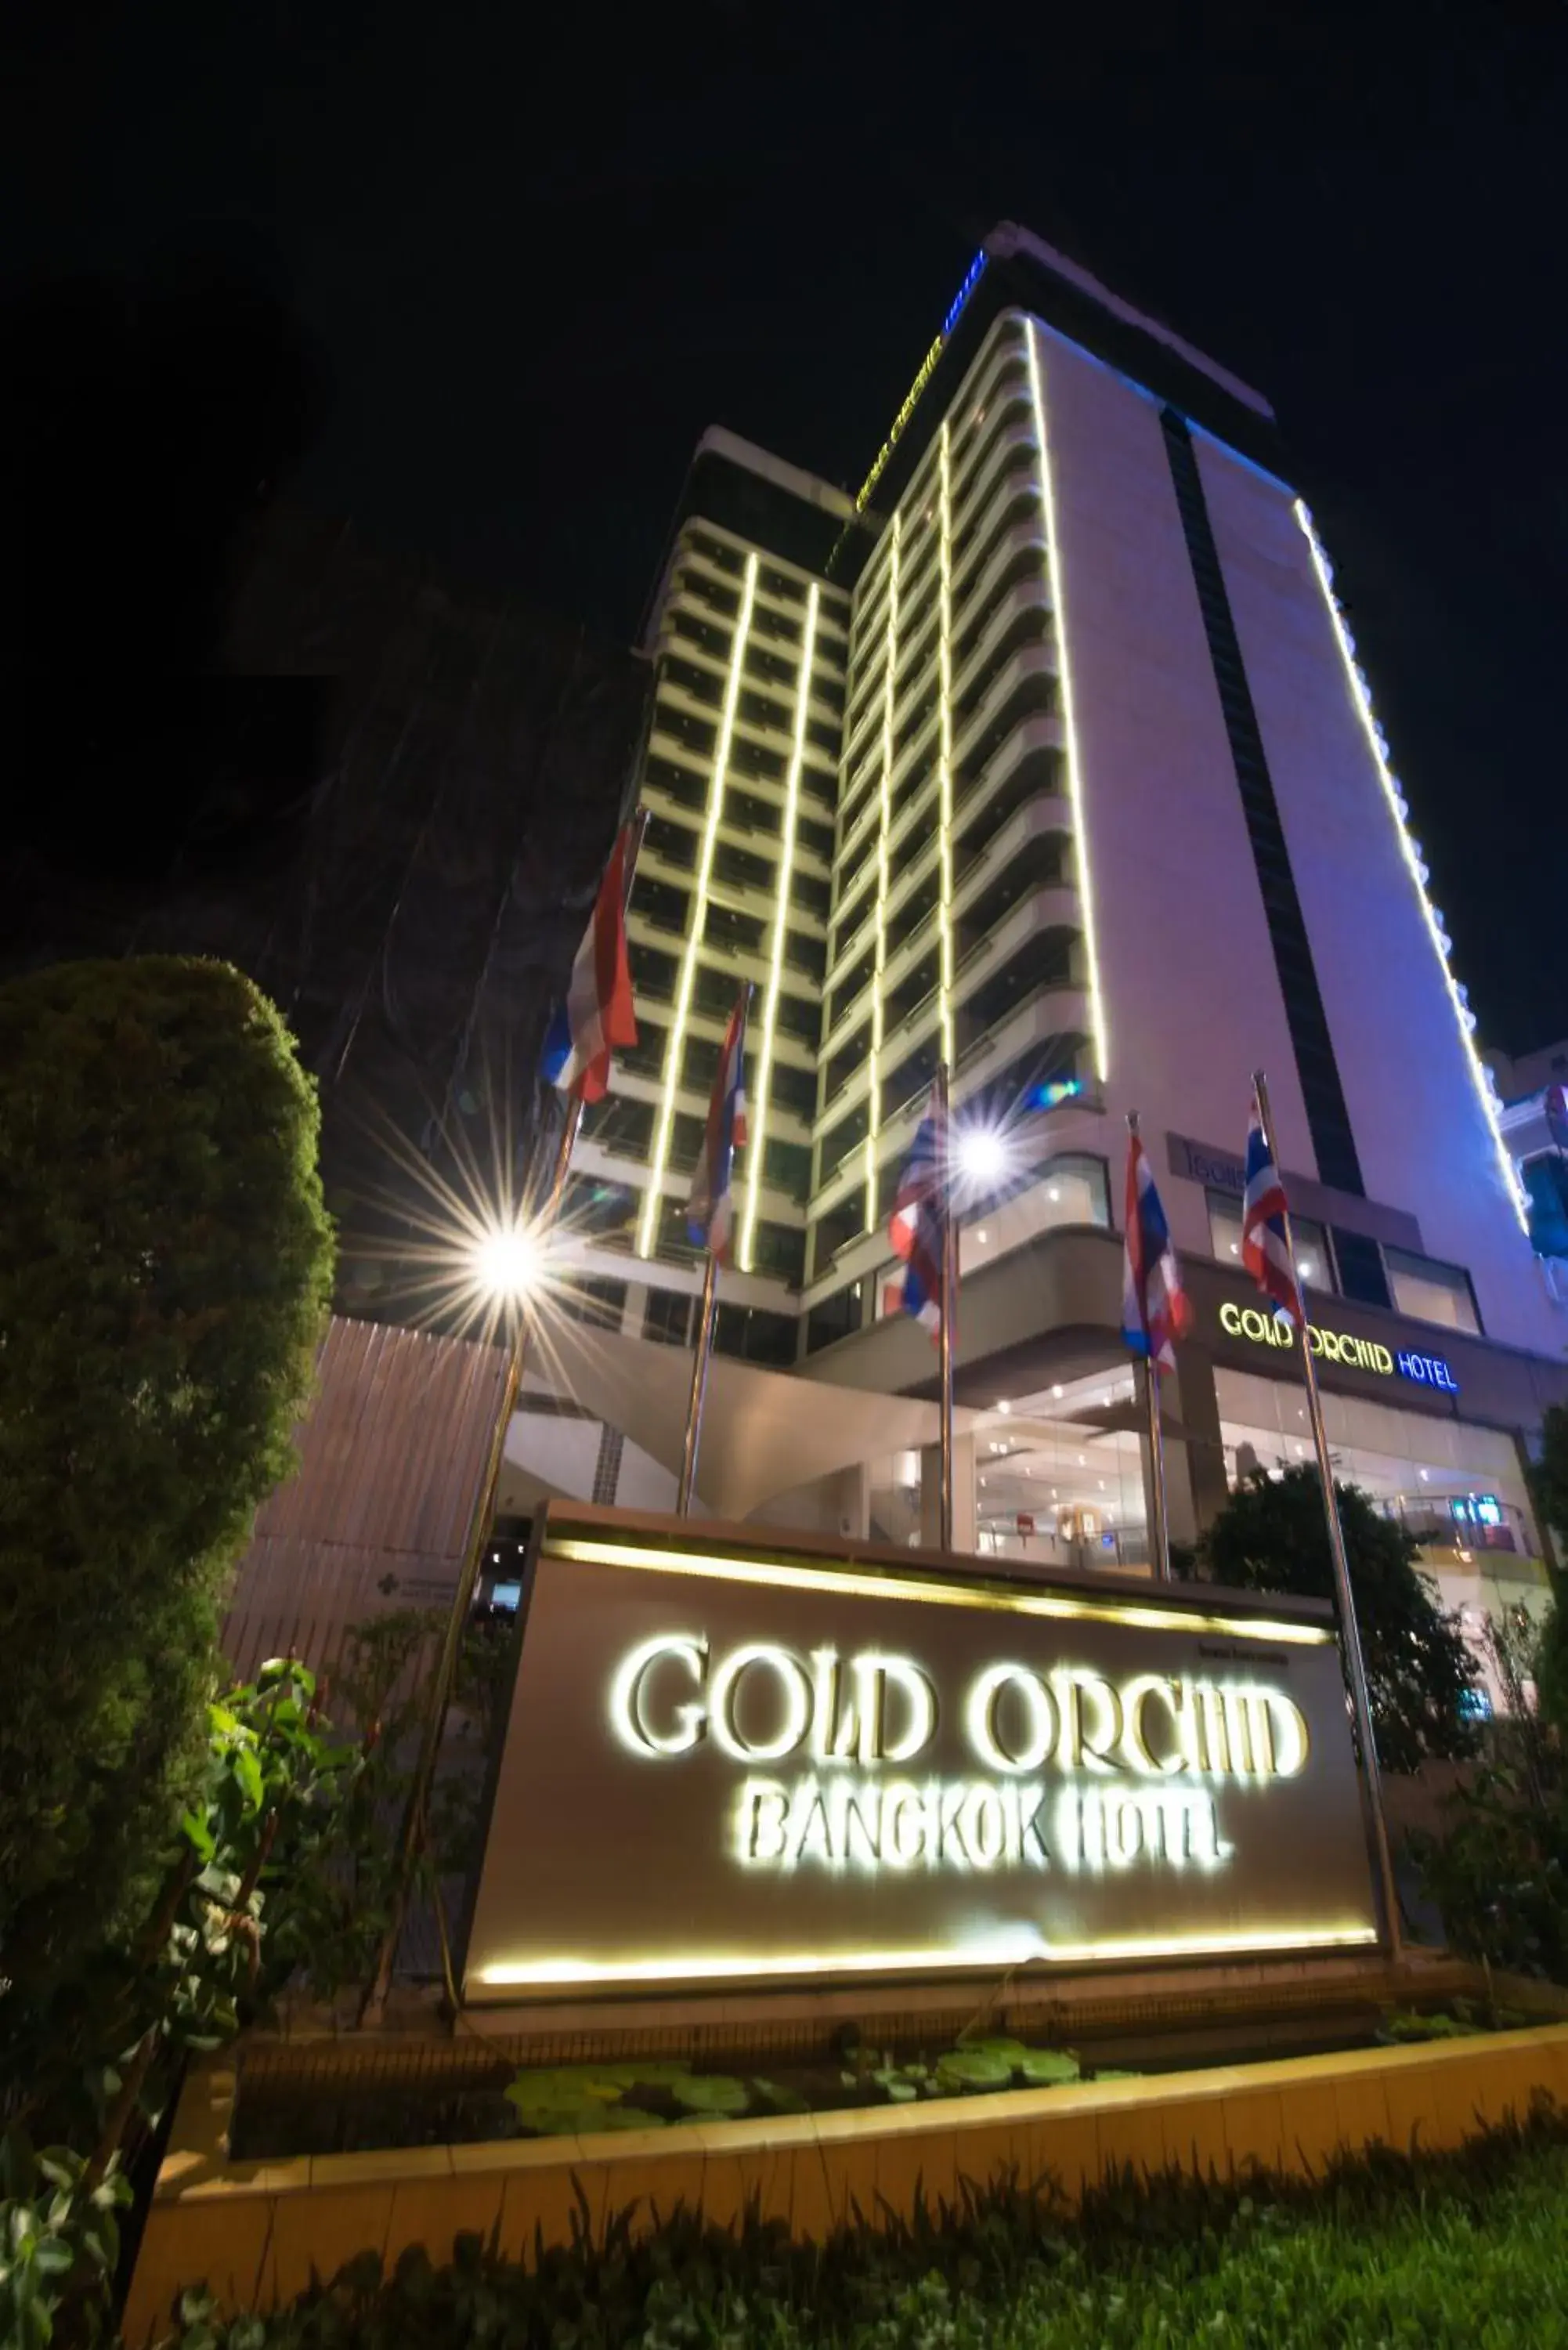 Property Building in Gold Orchid Bangkok Hotel